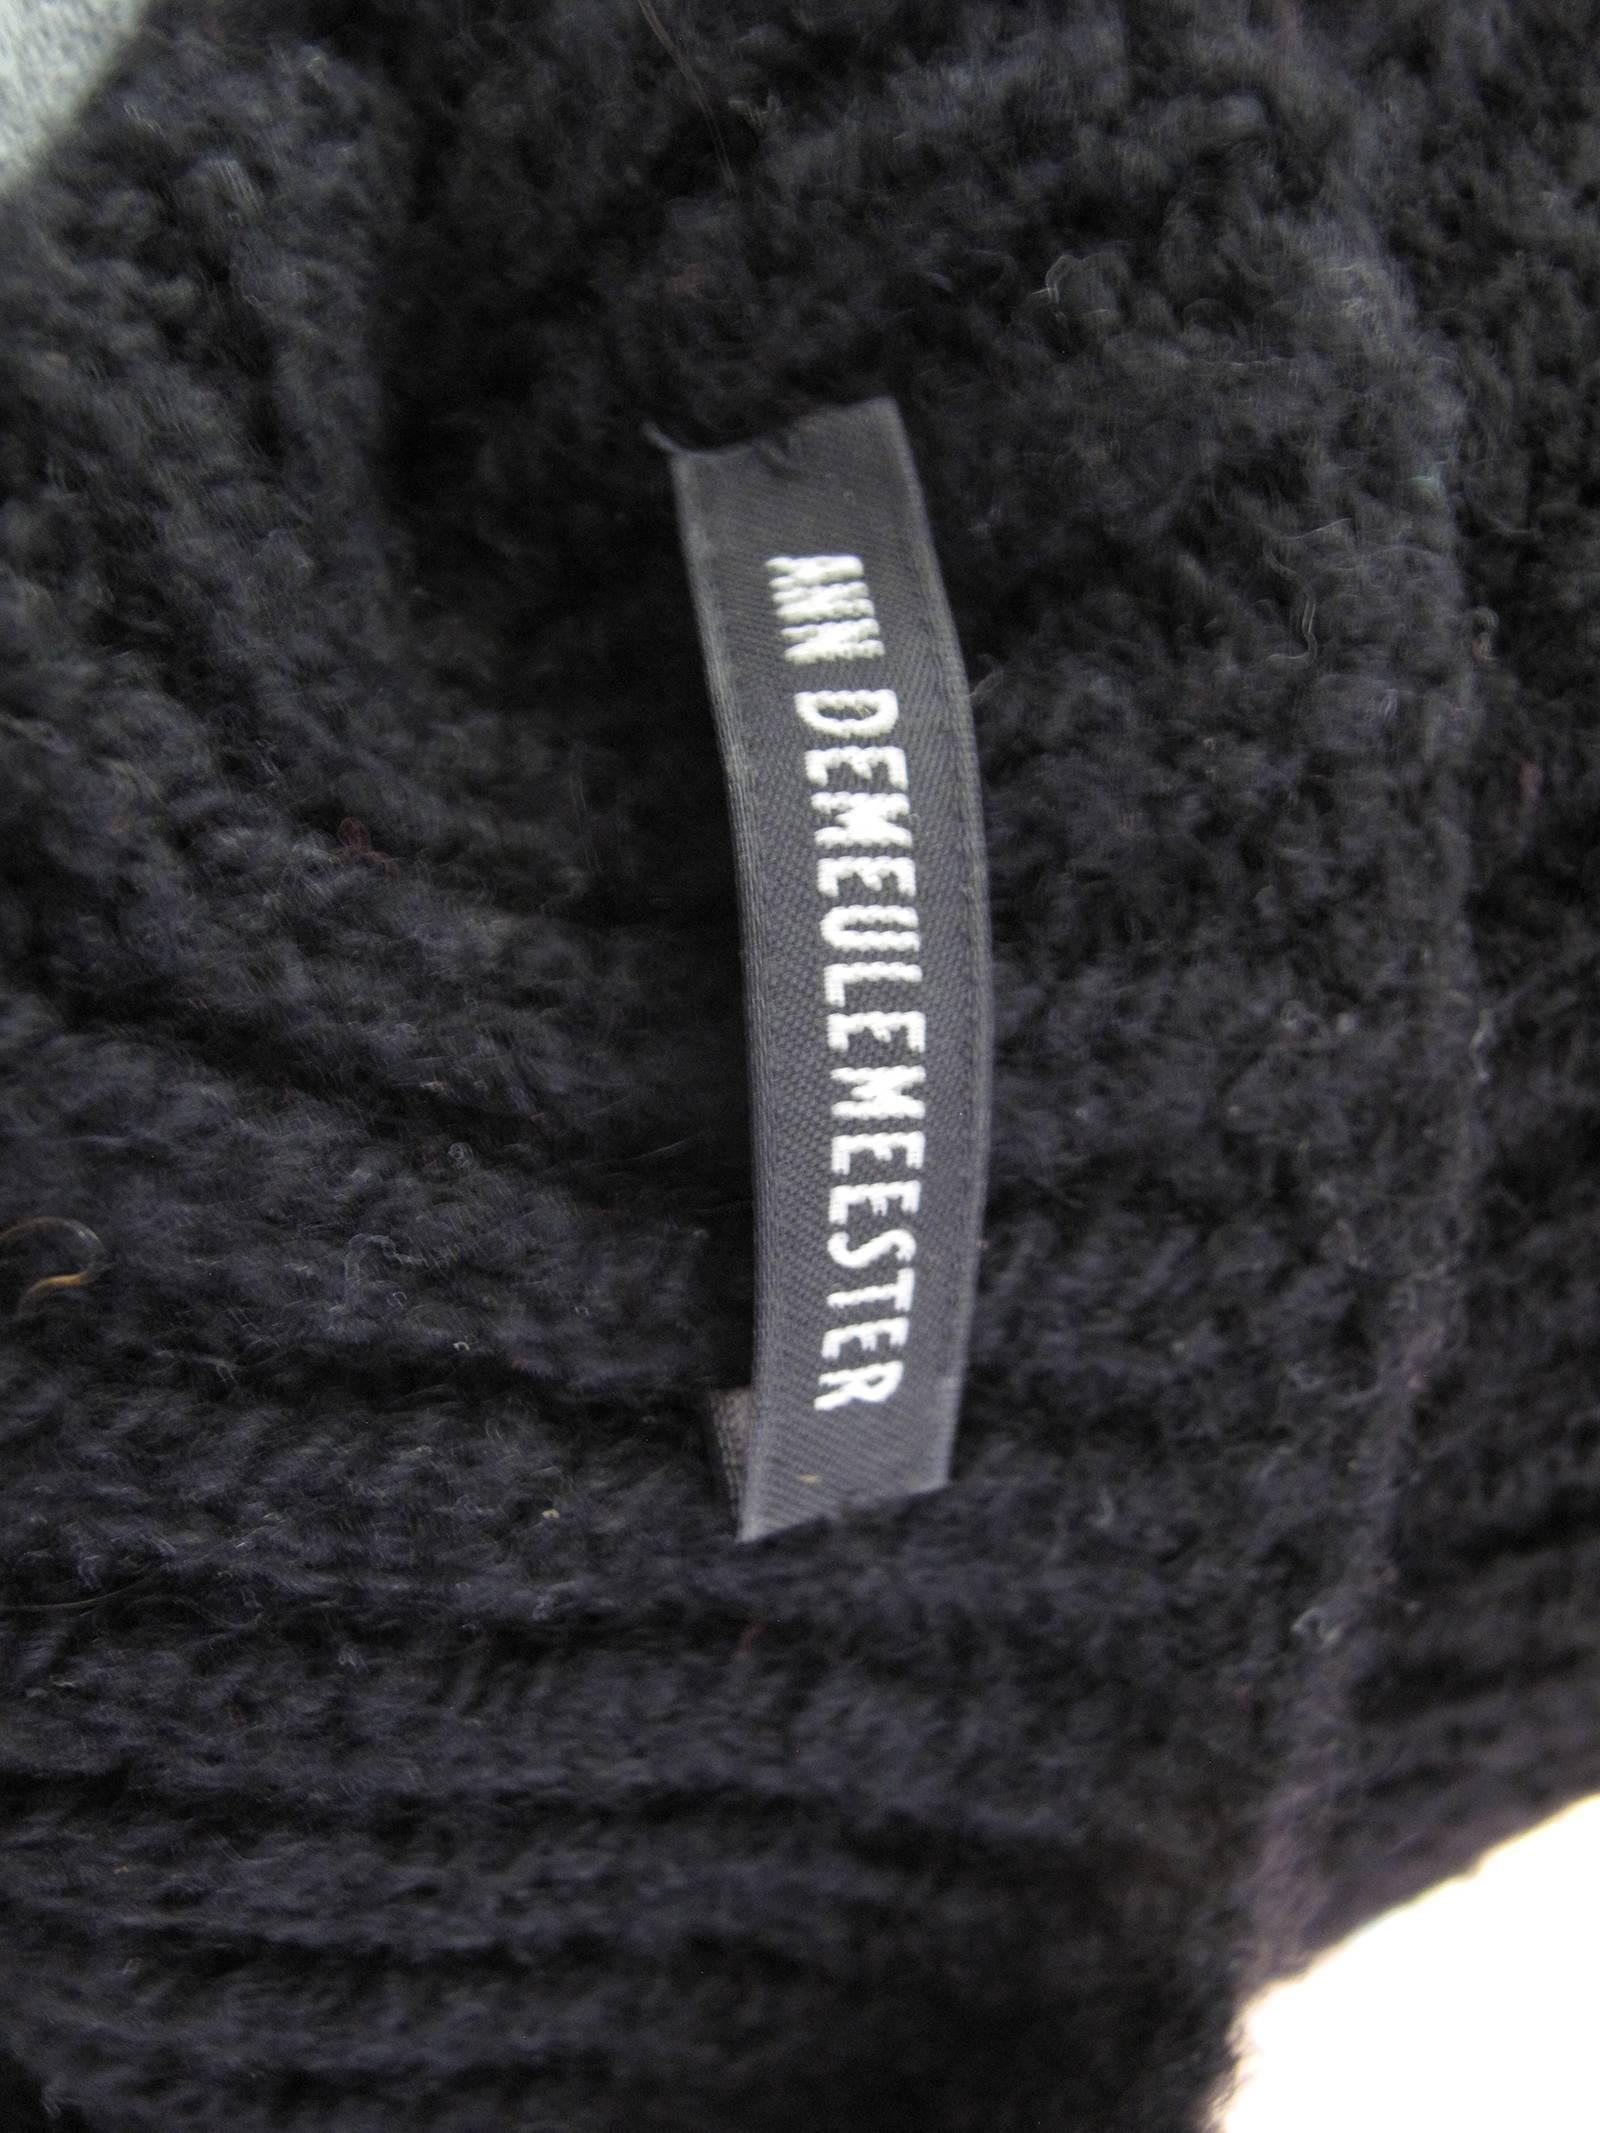 Ann Demeulemeester black ribbed wool sweater. Made in Belgium.  Condition: Very good. Size 42

We accept returns for refund, please see our terms. We offer free ground shipping within the US